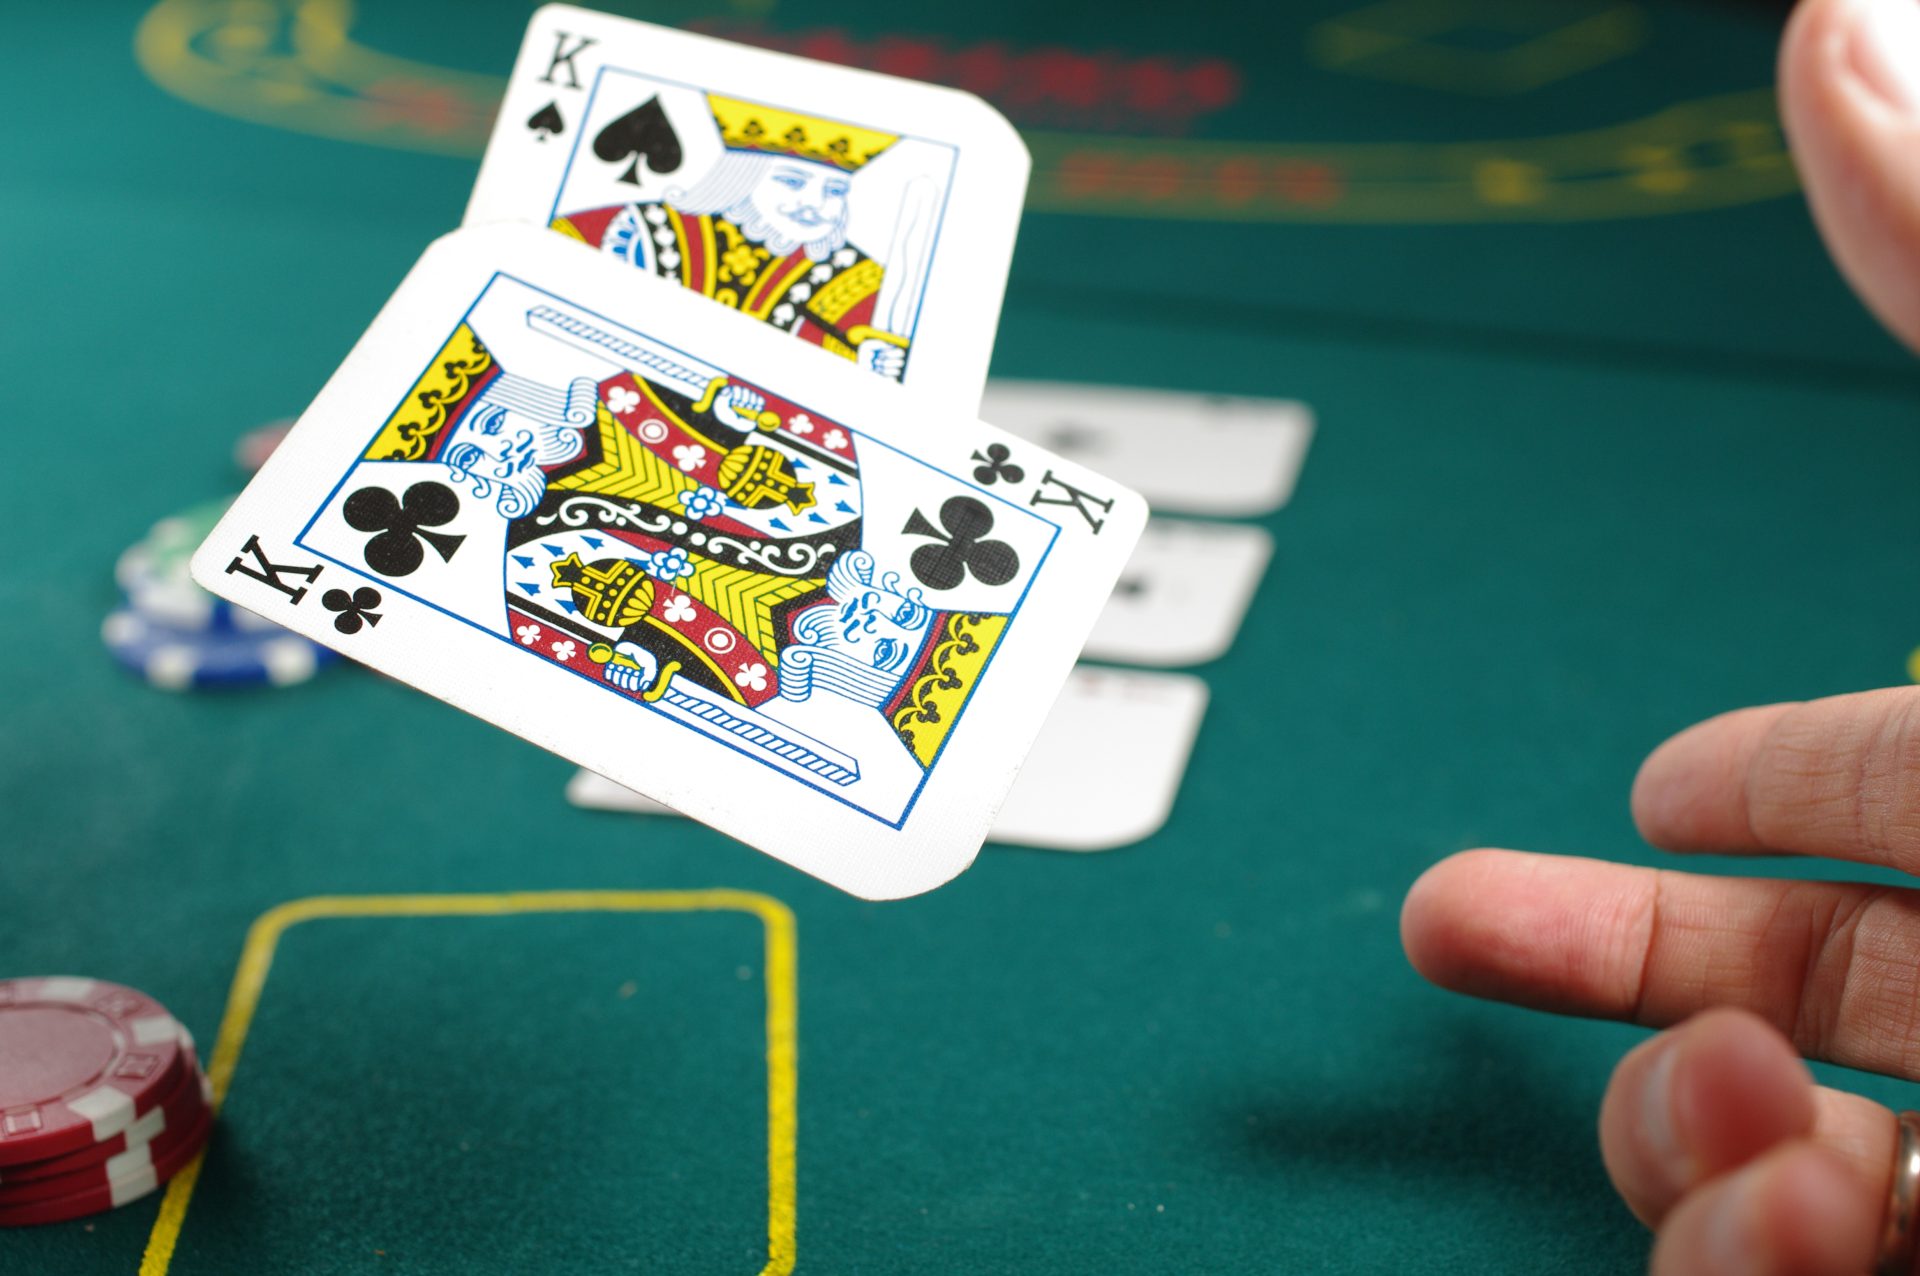 A guide explaining casino games improve decision-making and cognition